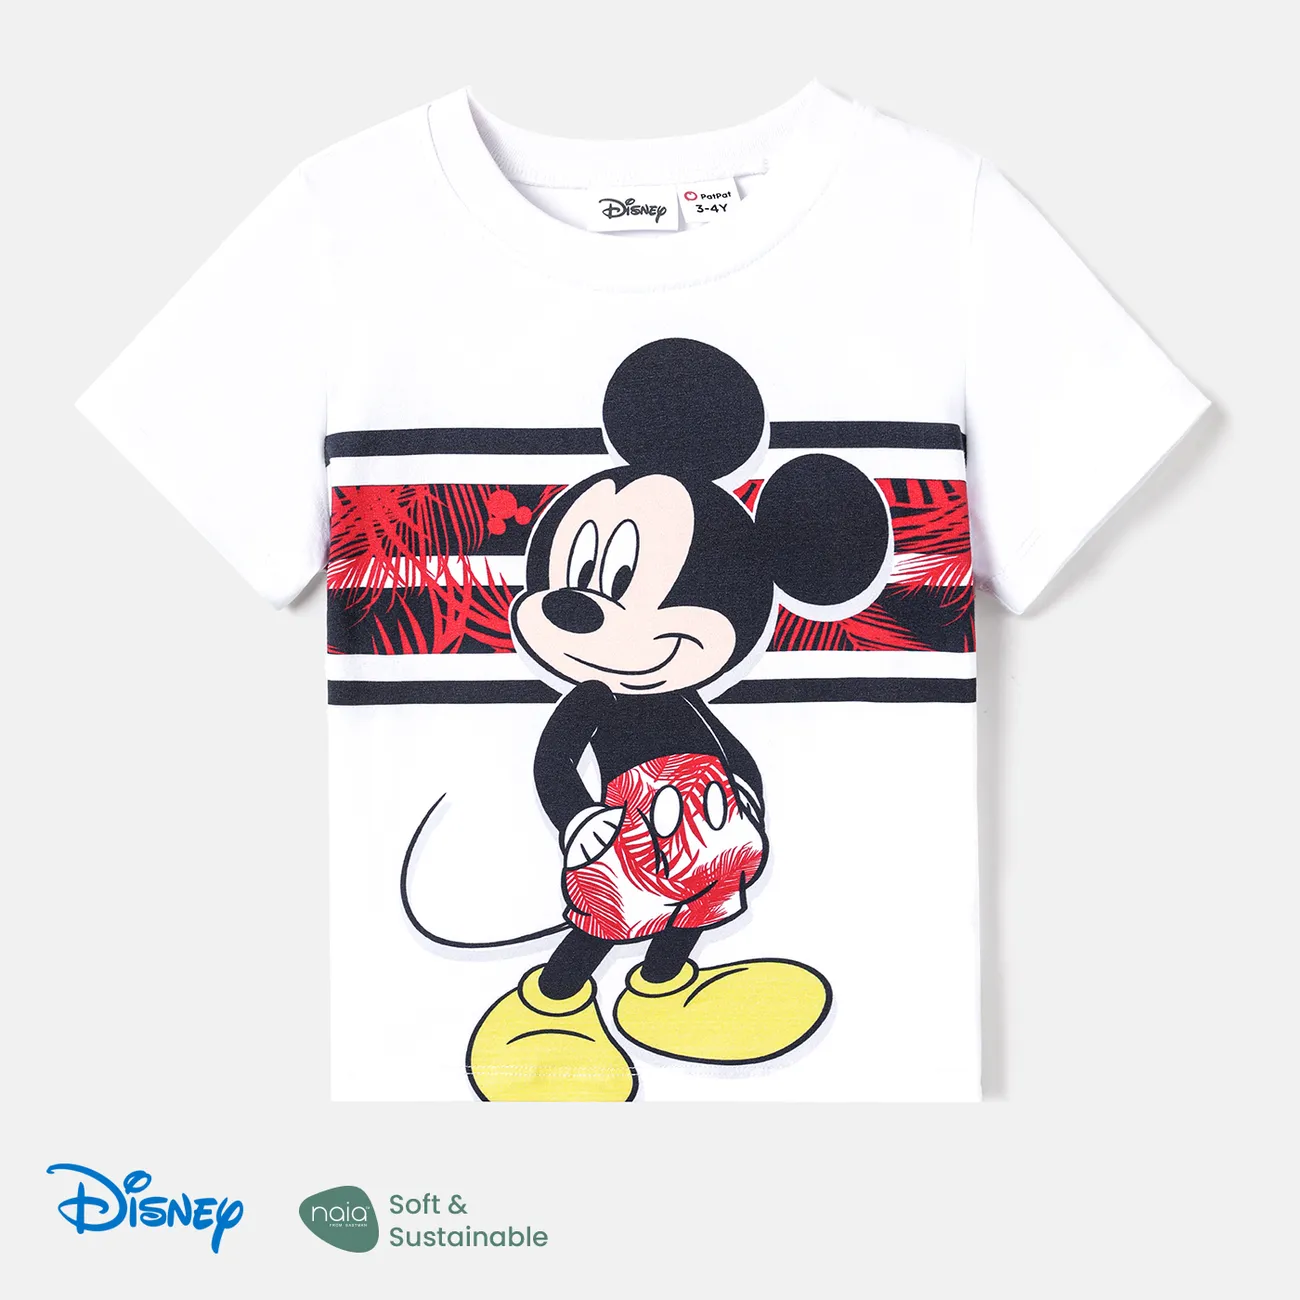 Disney Mickey and Friends Family Matching Plant Print Splice Ruffled Cami Dresses and Striped Cotton Short-sleeve T-shirts Sets Red big image 1